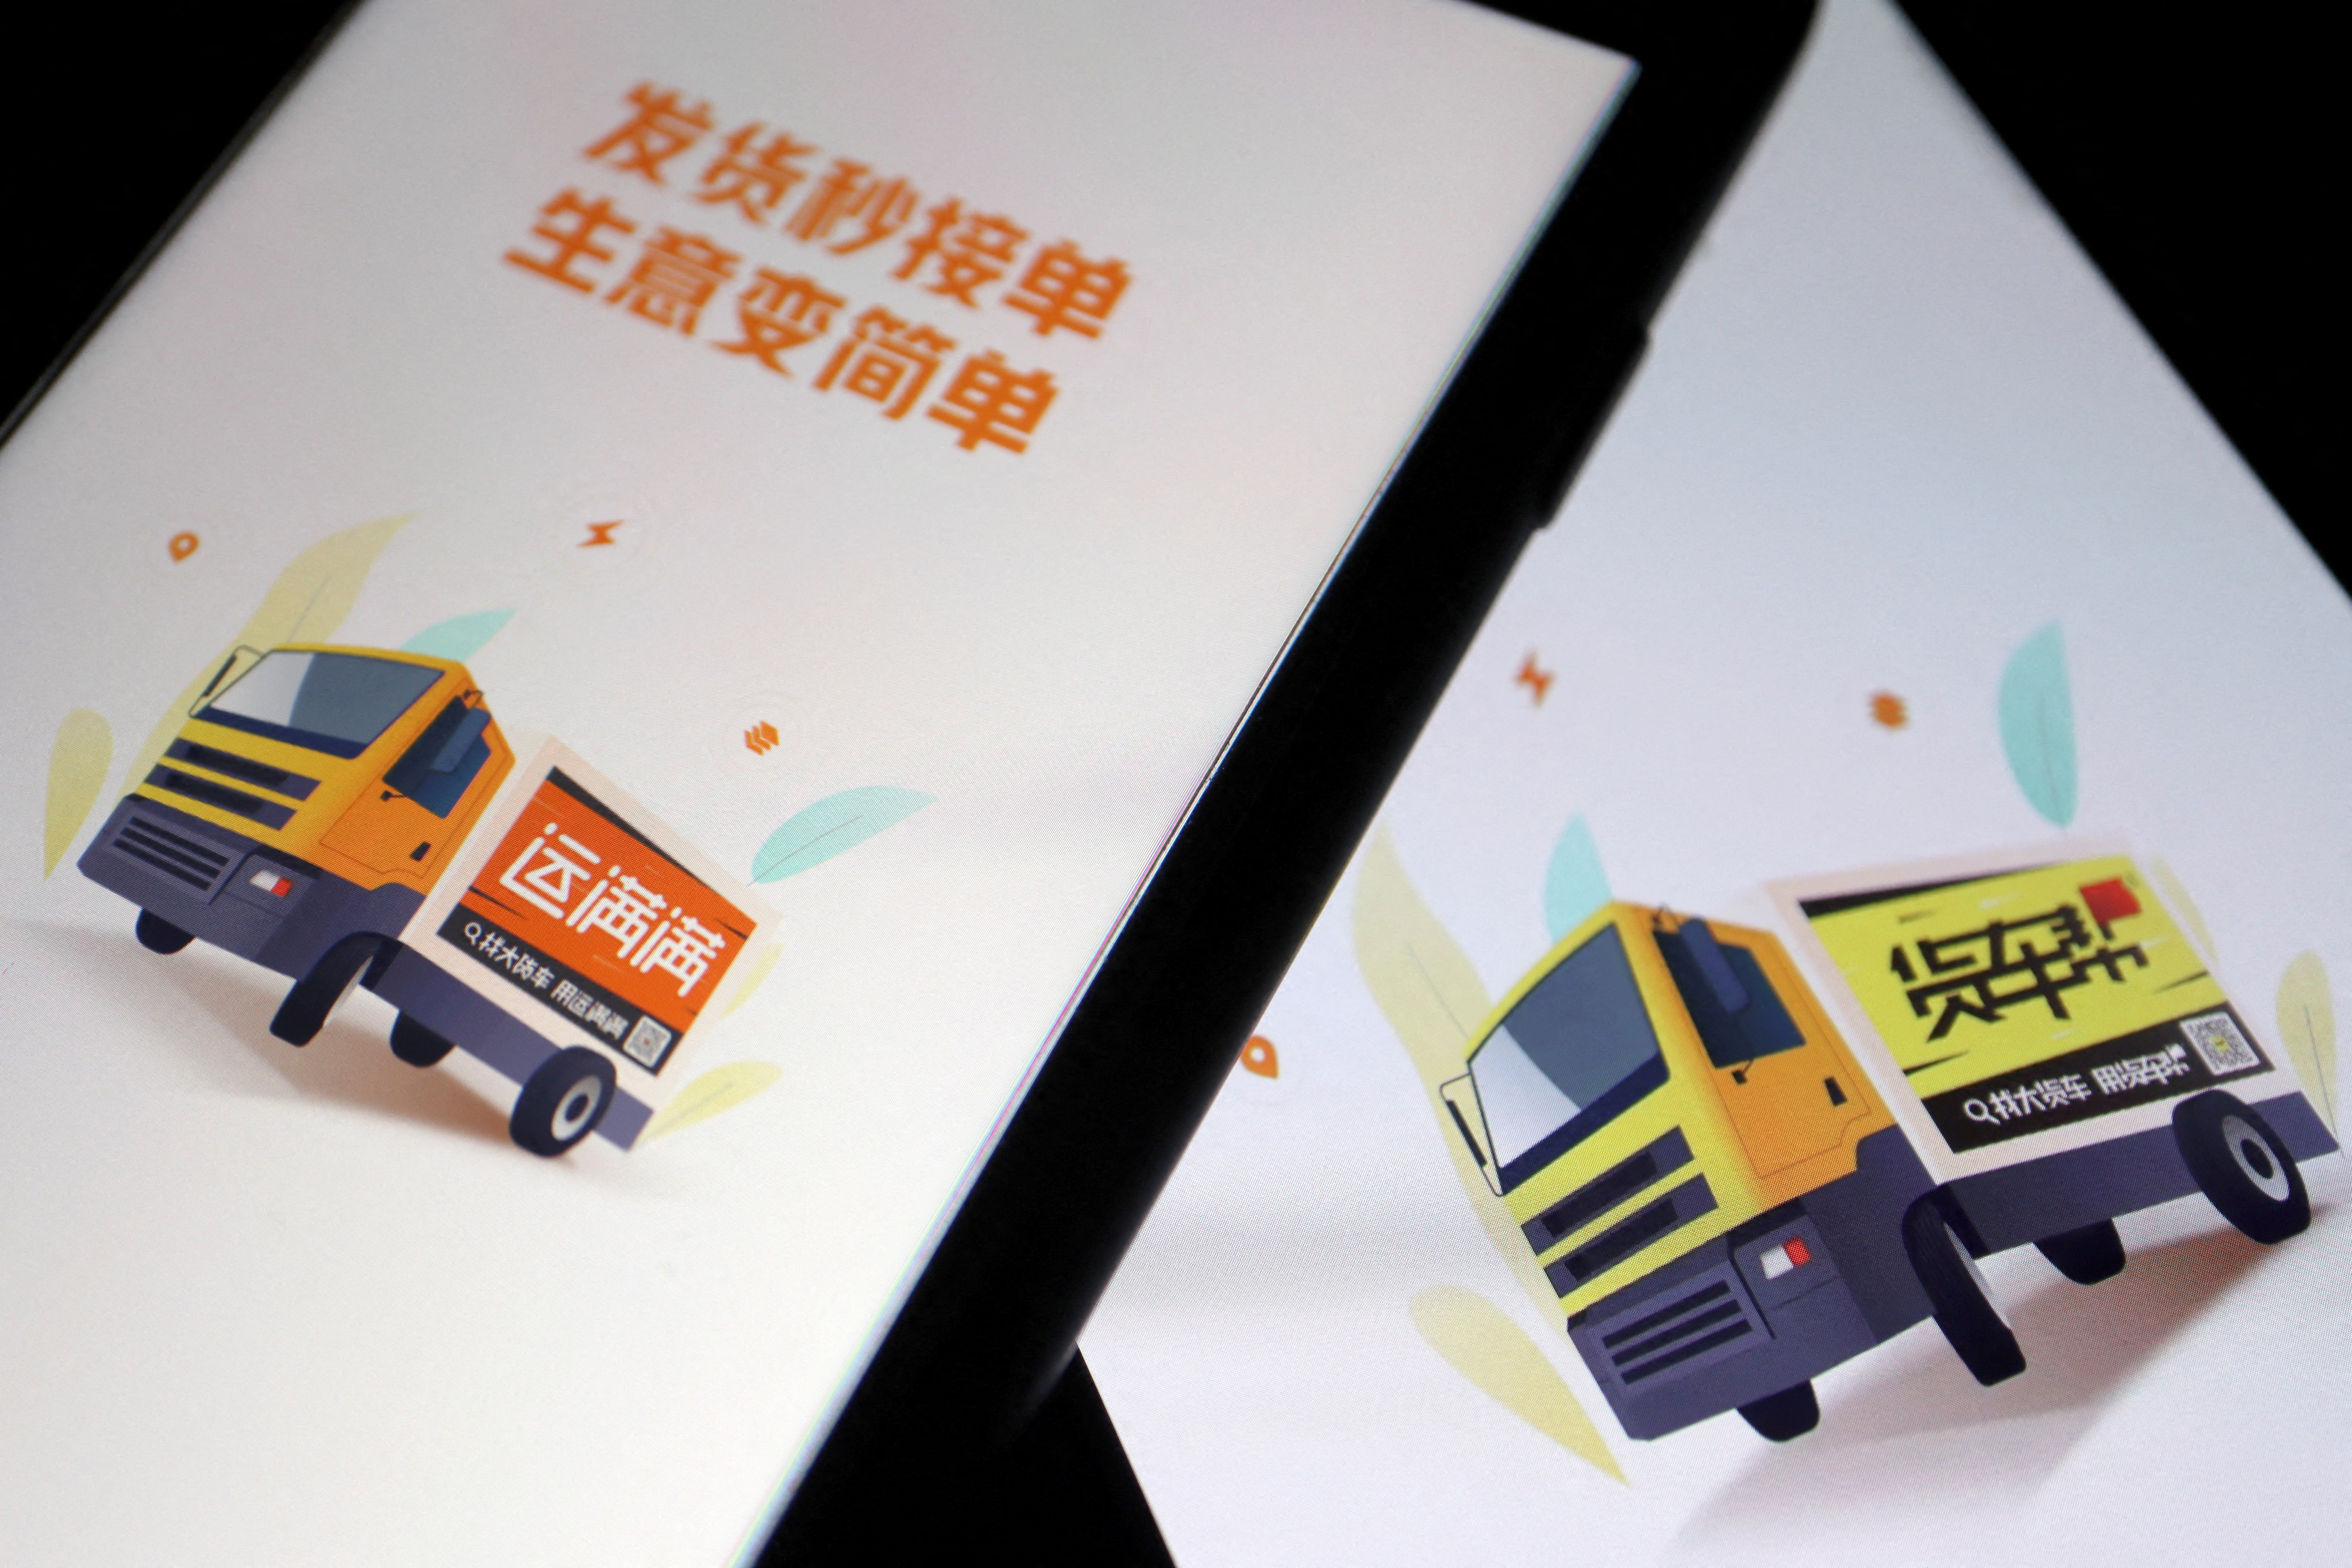 Illustration picture of Chinese truck-hailing apps Huochebang and Yunmanman